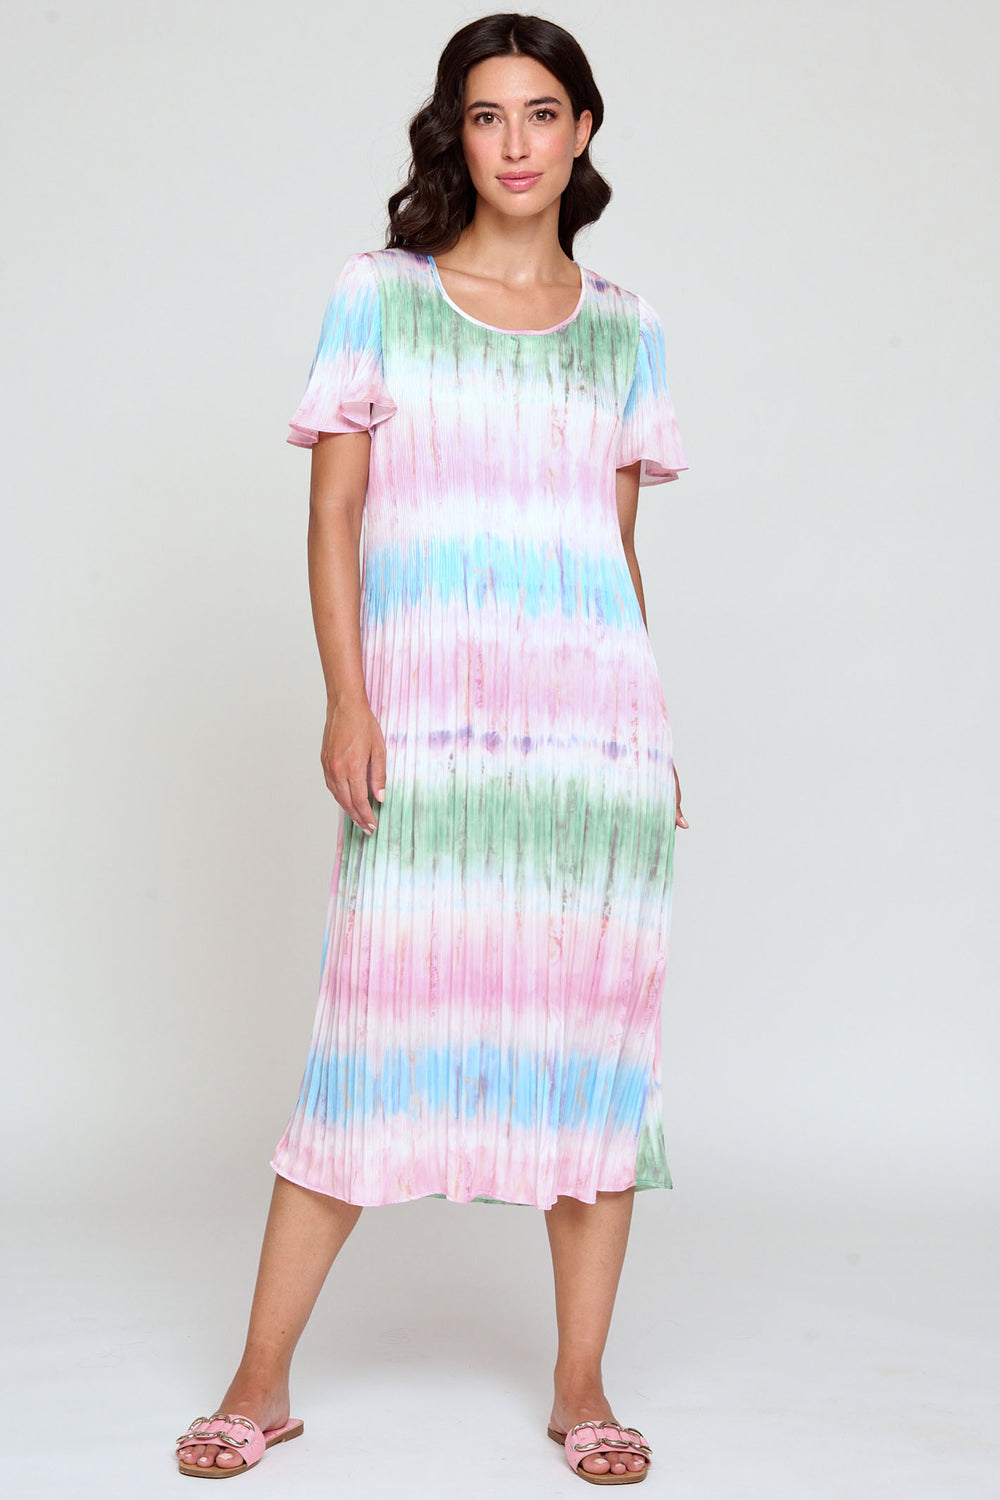 Bariloche Cayena Pink Tie-Dye Print Short Sleeved Midi Dress - Rouge Boutique Inverness